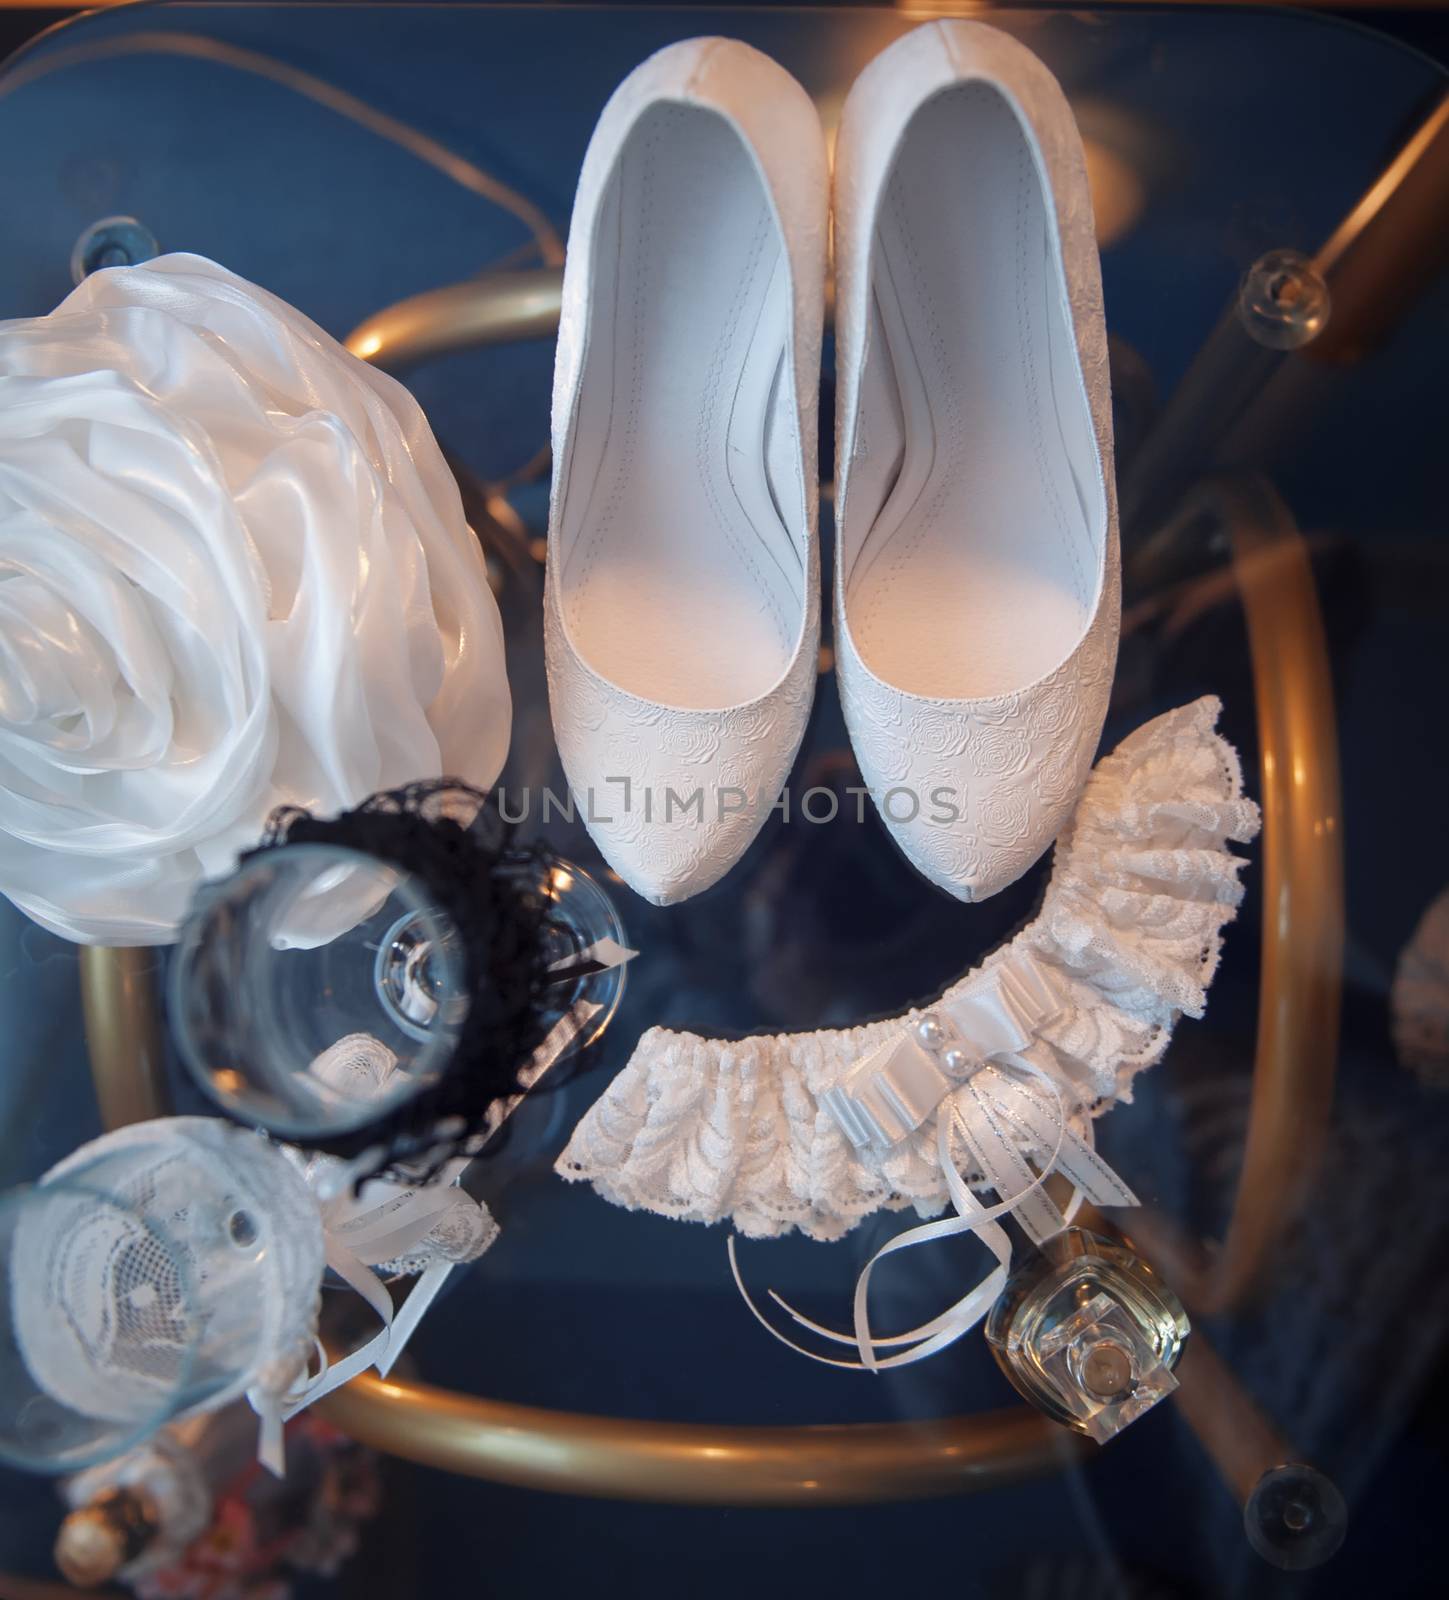 white bridal shoes and other wedding attributes on a table